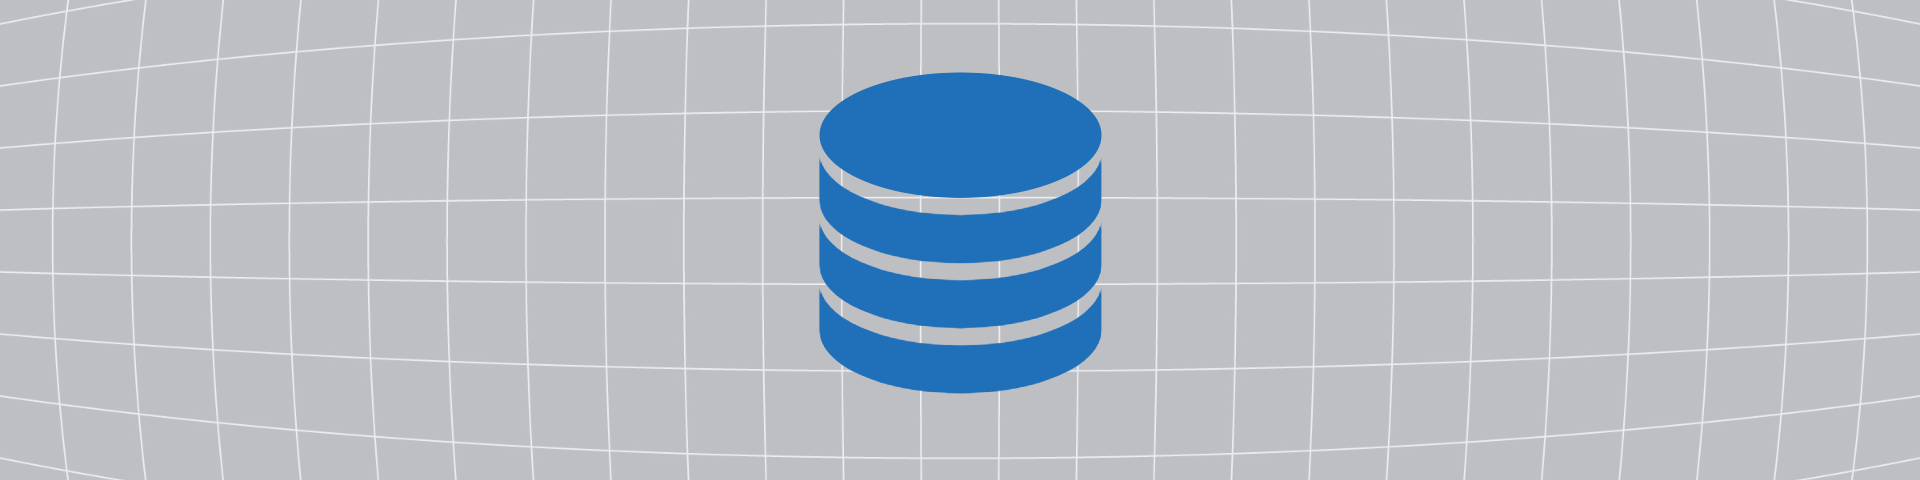 Find column names within the metadata of an Oracle SQL database